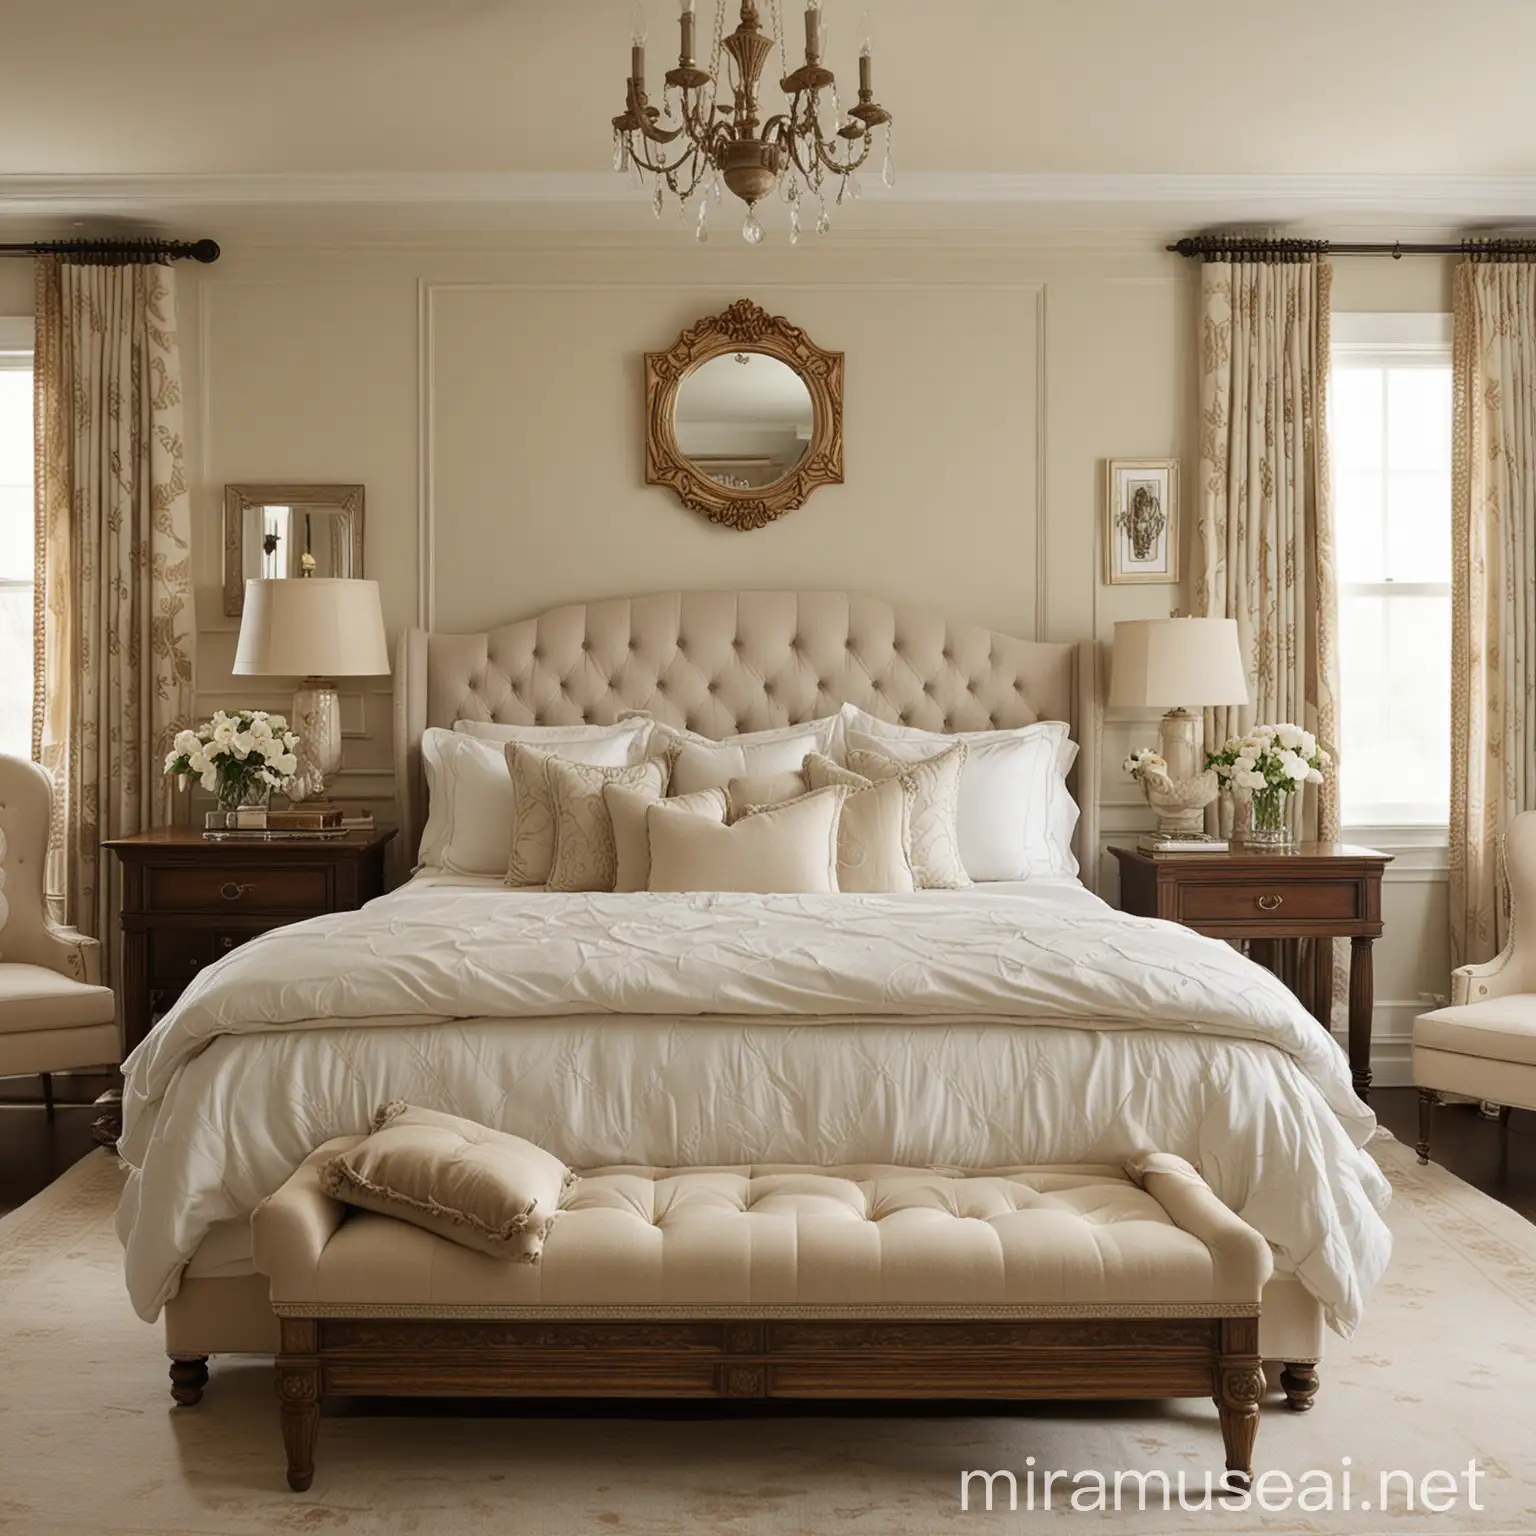 A classic bedroom typically features elegant and timeless design elements. Picture a neutral color palette, perhaps with subtle pastel accents, like soft blues or creams. Rich, dark wood furniture, such as a sleigh bed or a four-poster bed, adds a sense of luxury. Crisp, white bedding with intricate patterns or delicate embroidery can provide a touch of sophistication. Crown molding and wainscoting add architectural interest, while plush area rugs and heavy drapes create a cozy atmosphere. A classic bedroom might also include antique furnishings, such as a vanity or dresser, adorned with ornate handles or carvings, adding a sense of history and charm. Lighting fixtures, like chandeliers or table lamps with fabric shades, contribute to the overall ambiance, casting a warm, inviting glow. Finally, decorative accents such as framed artwork, mirrors, and fresh flowers or plants can add the finishing touches, creating a serene and elegant space for relaxation.